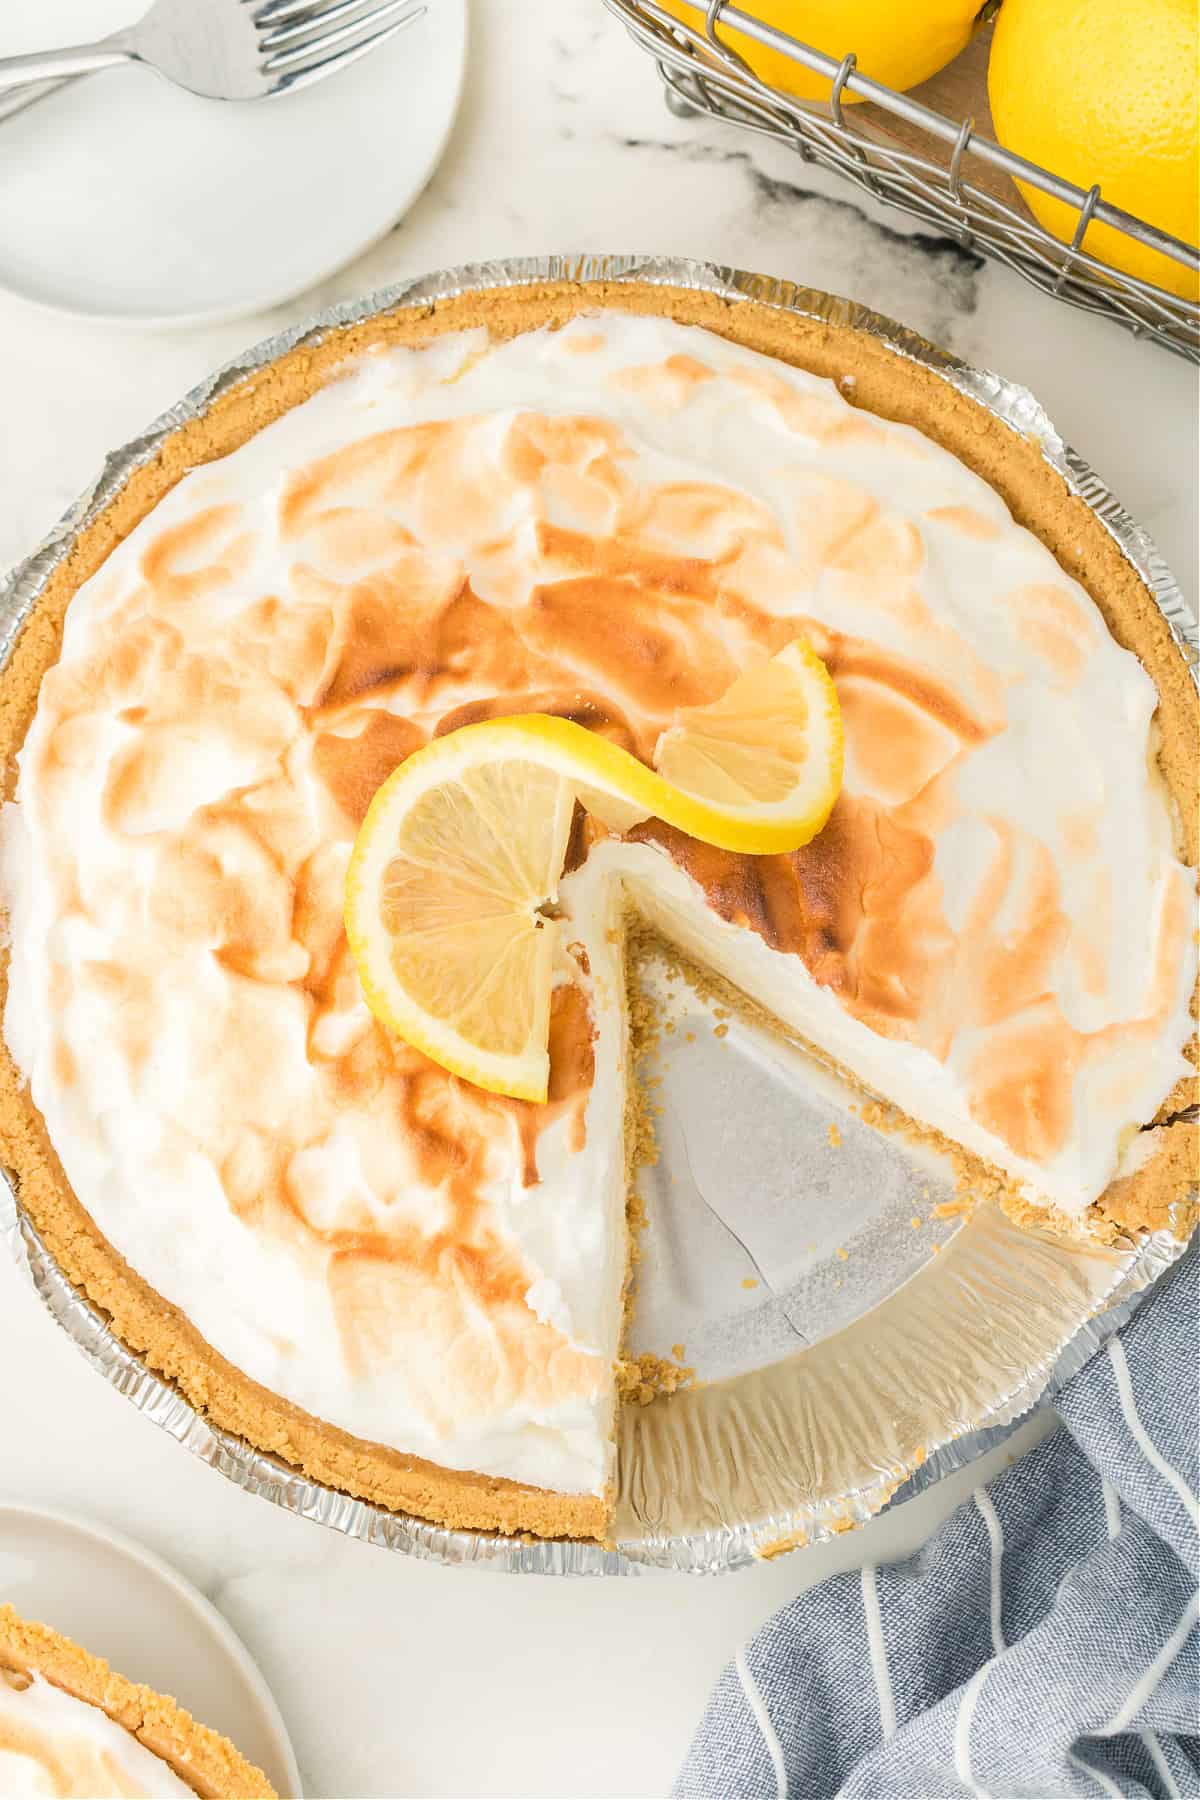 A plate of food on a table, with Lemon and Pie